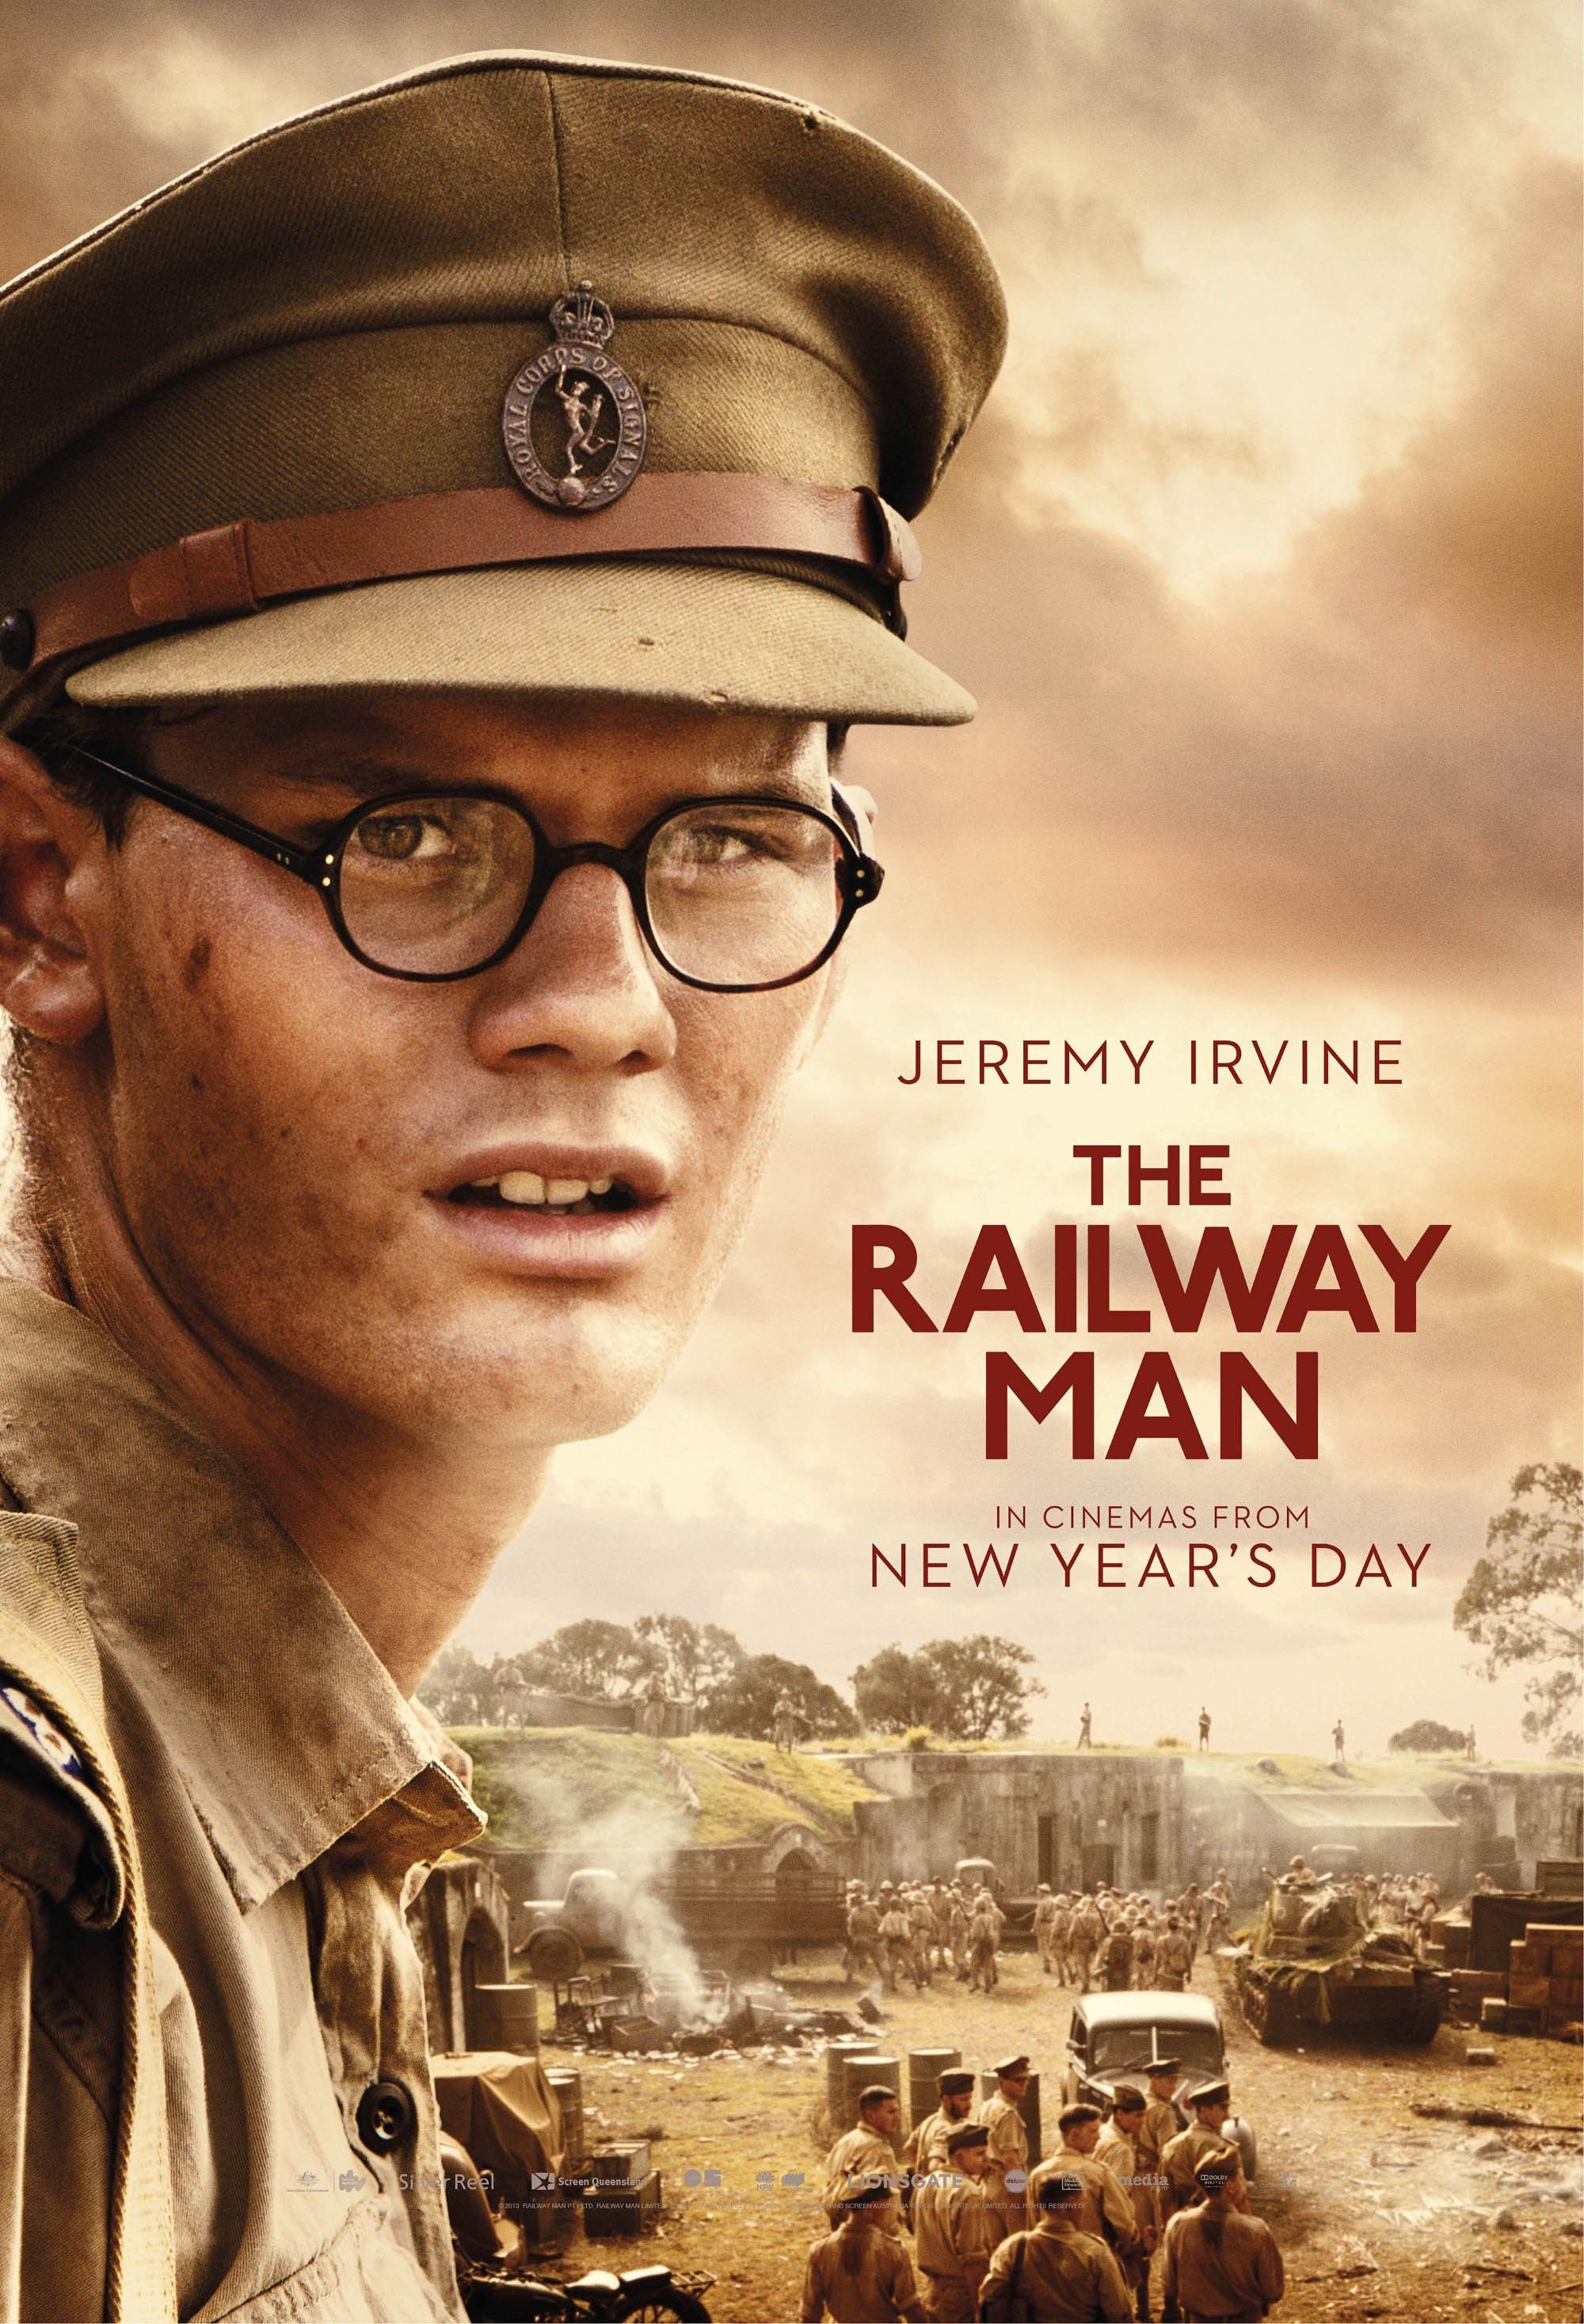 The Railway Man Jeremy Irvine Character Poster